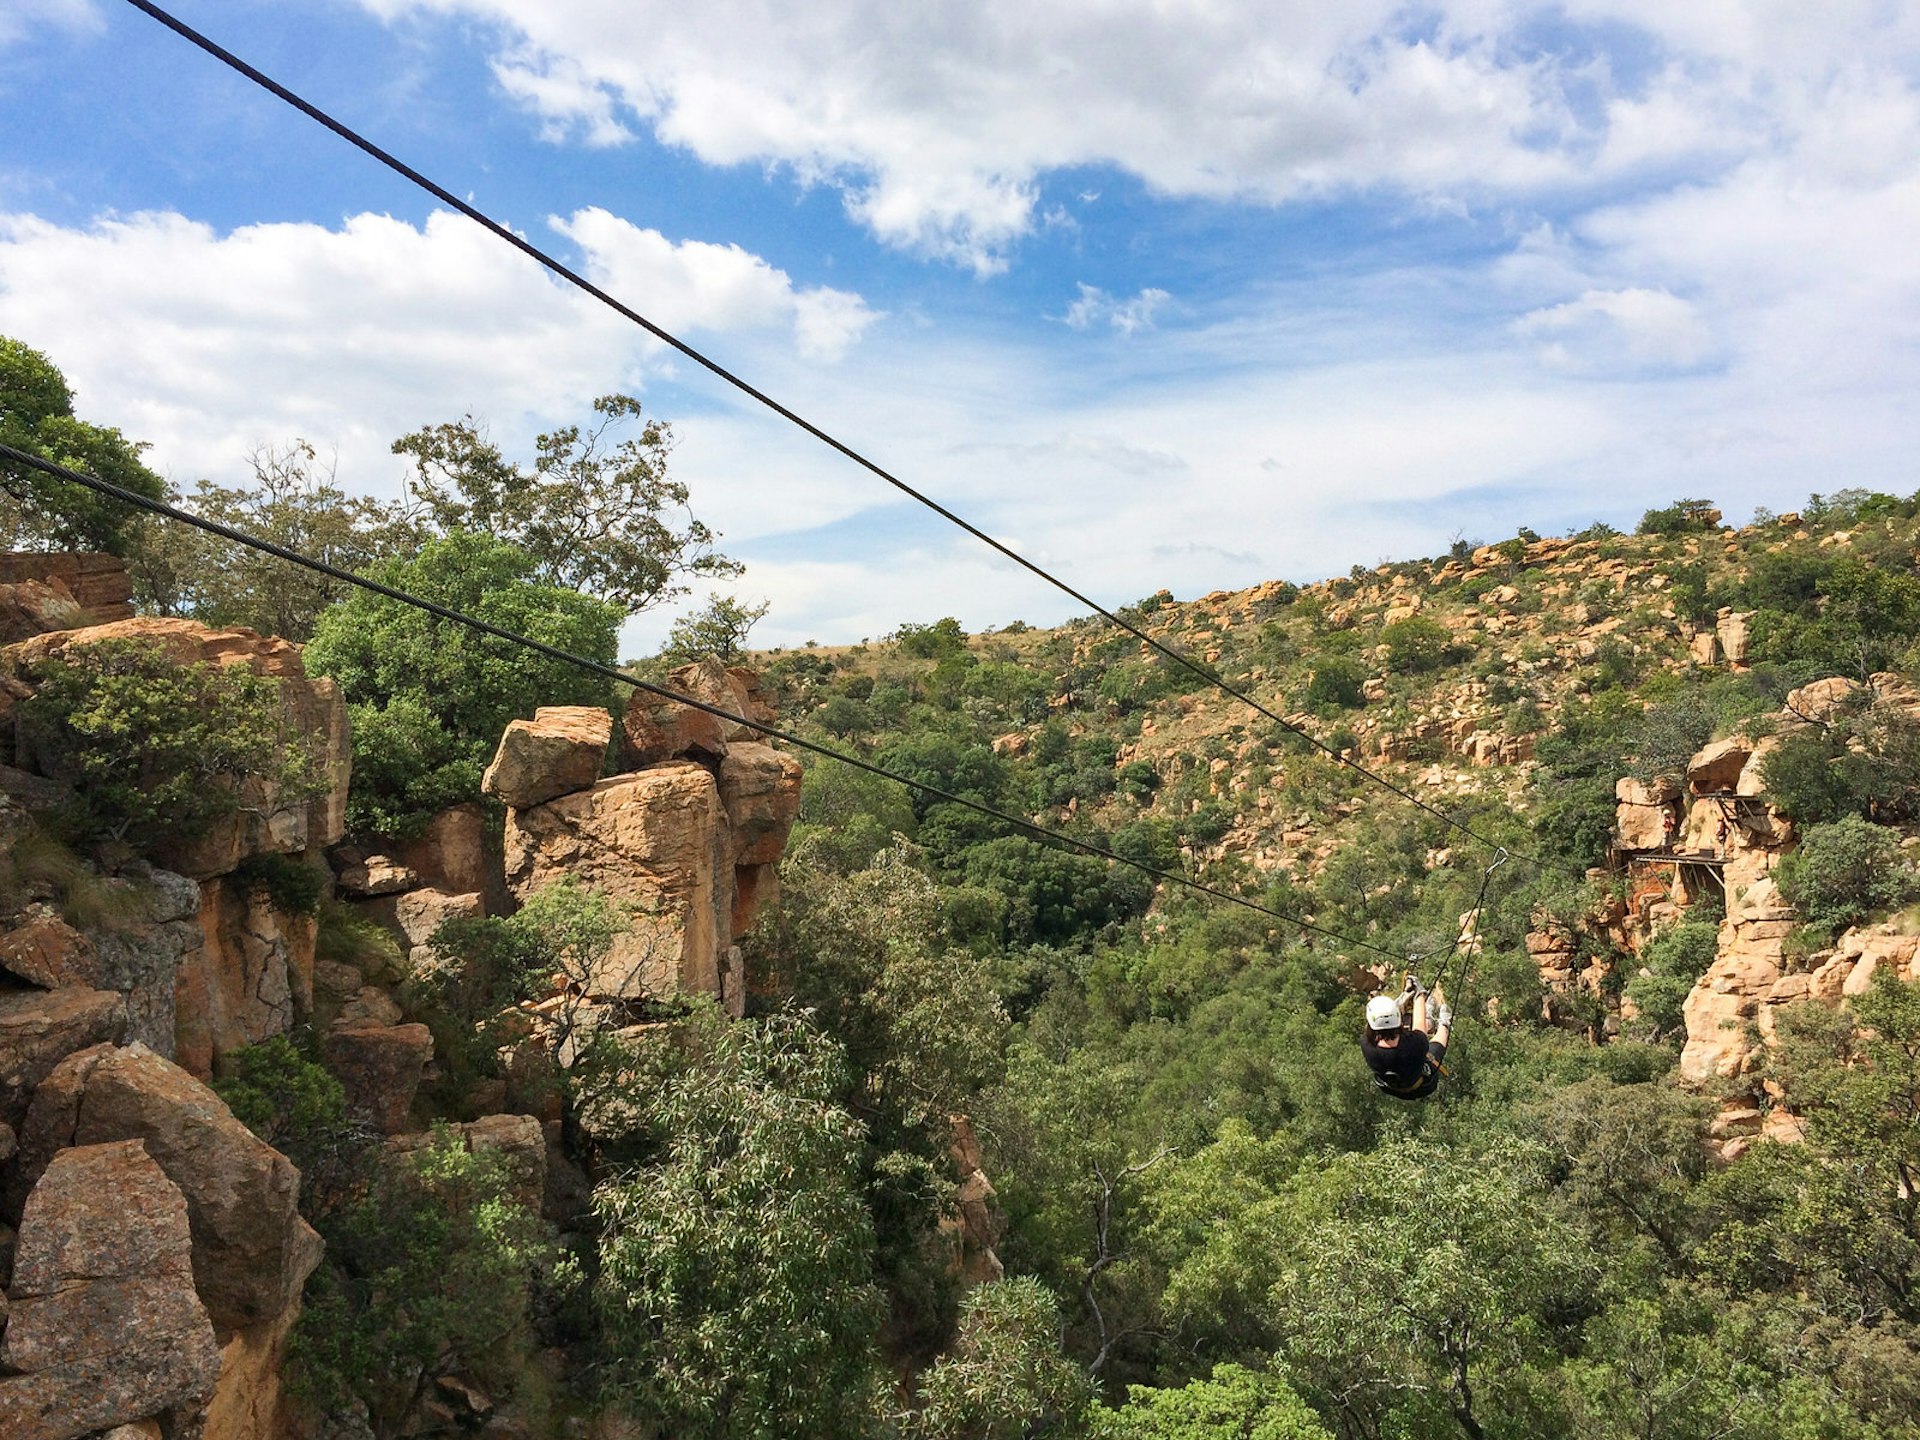 Two steel cables descend from the top left of the image to the bottom right; below them is a rocky and forested canyon along with a single person zooming downward on the cables as part of the zipline canopy tour